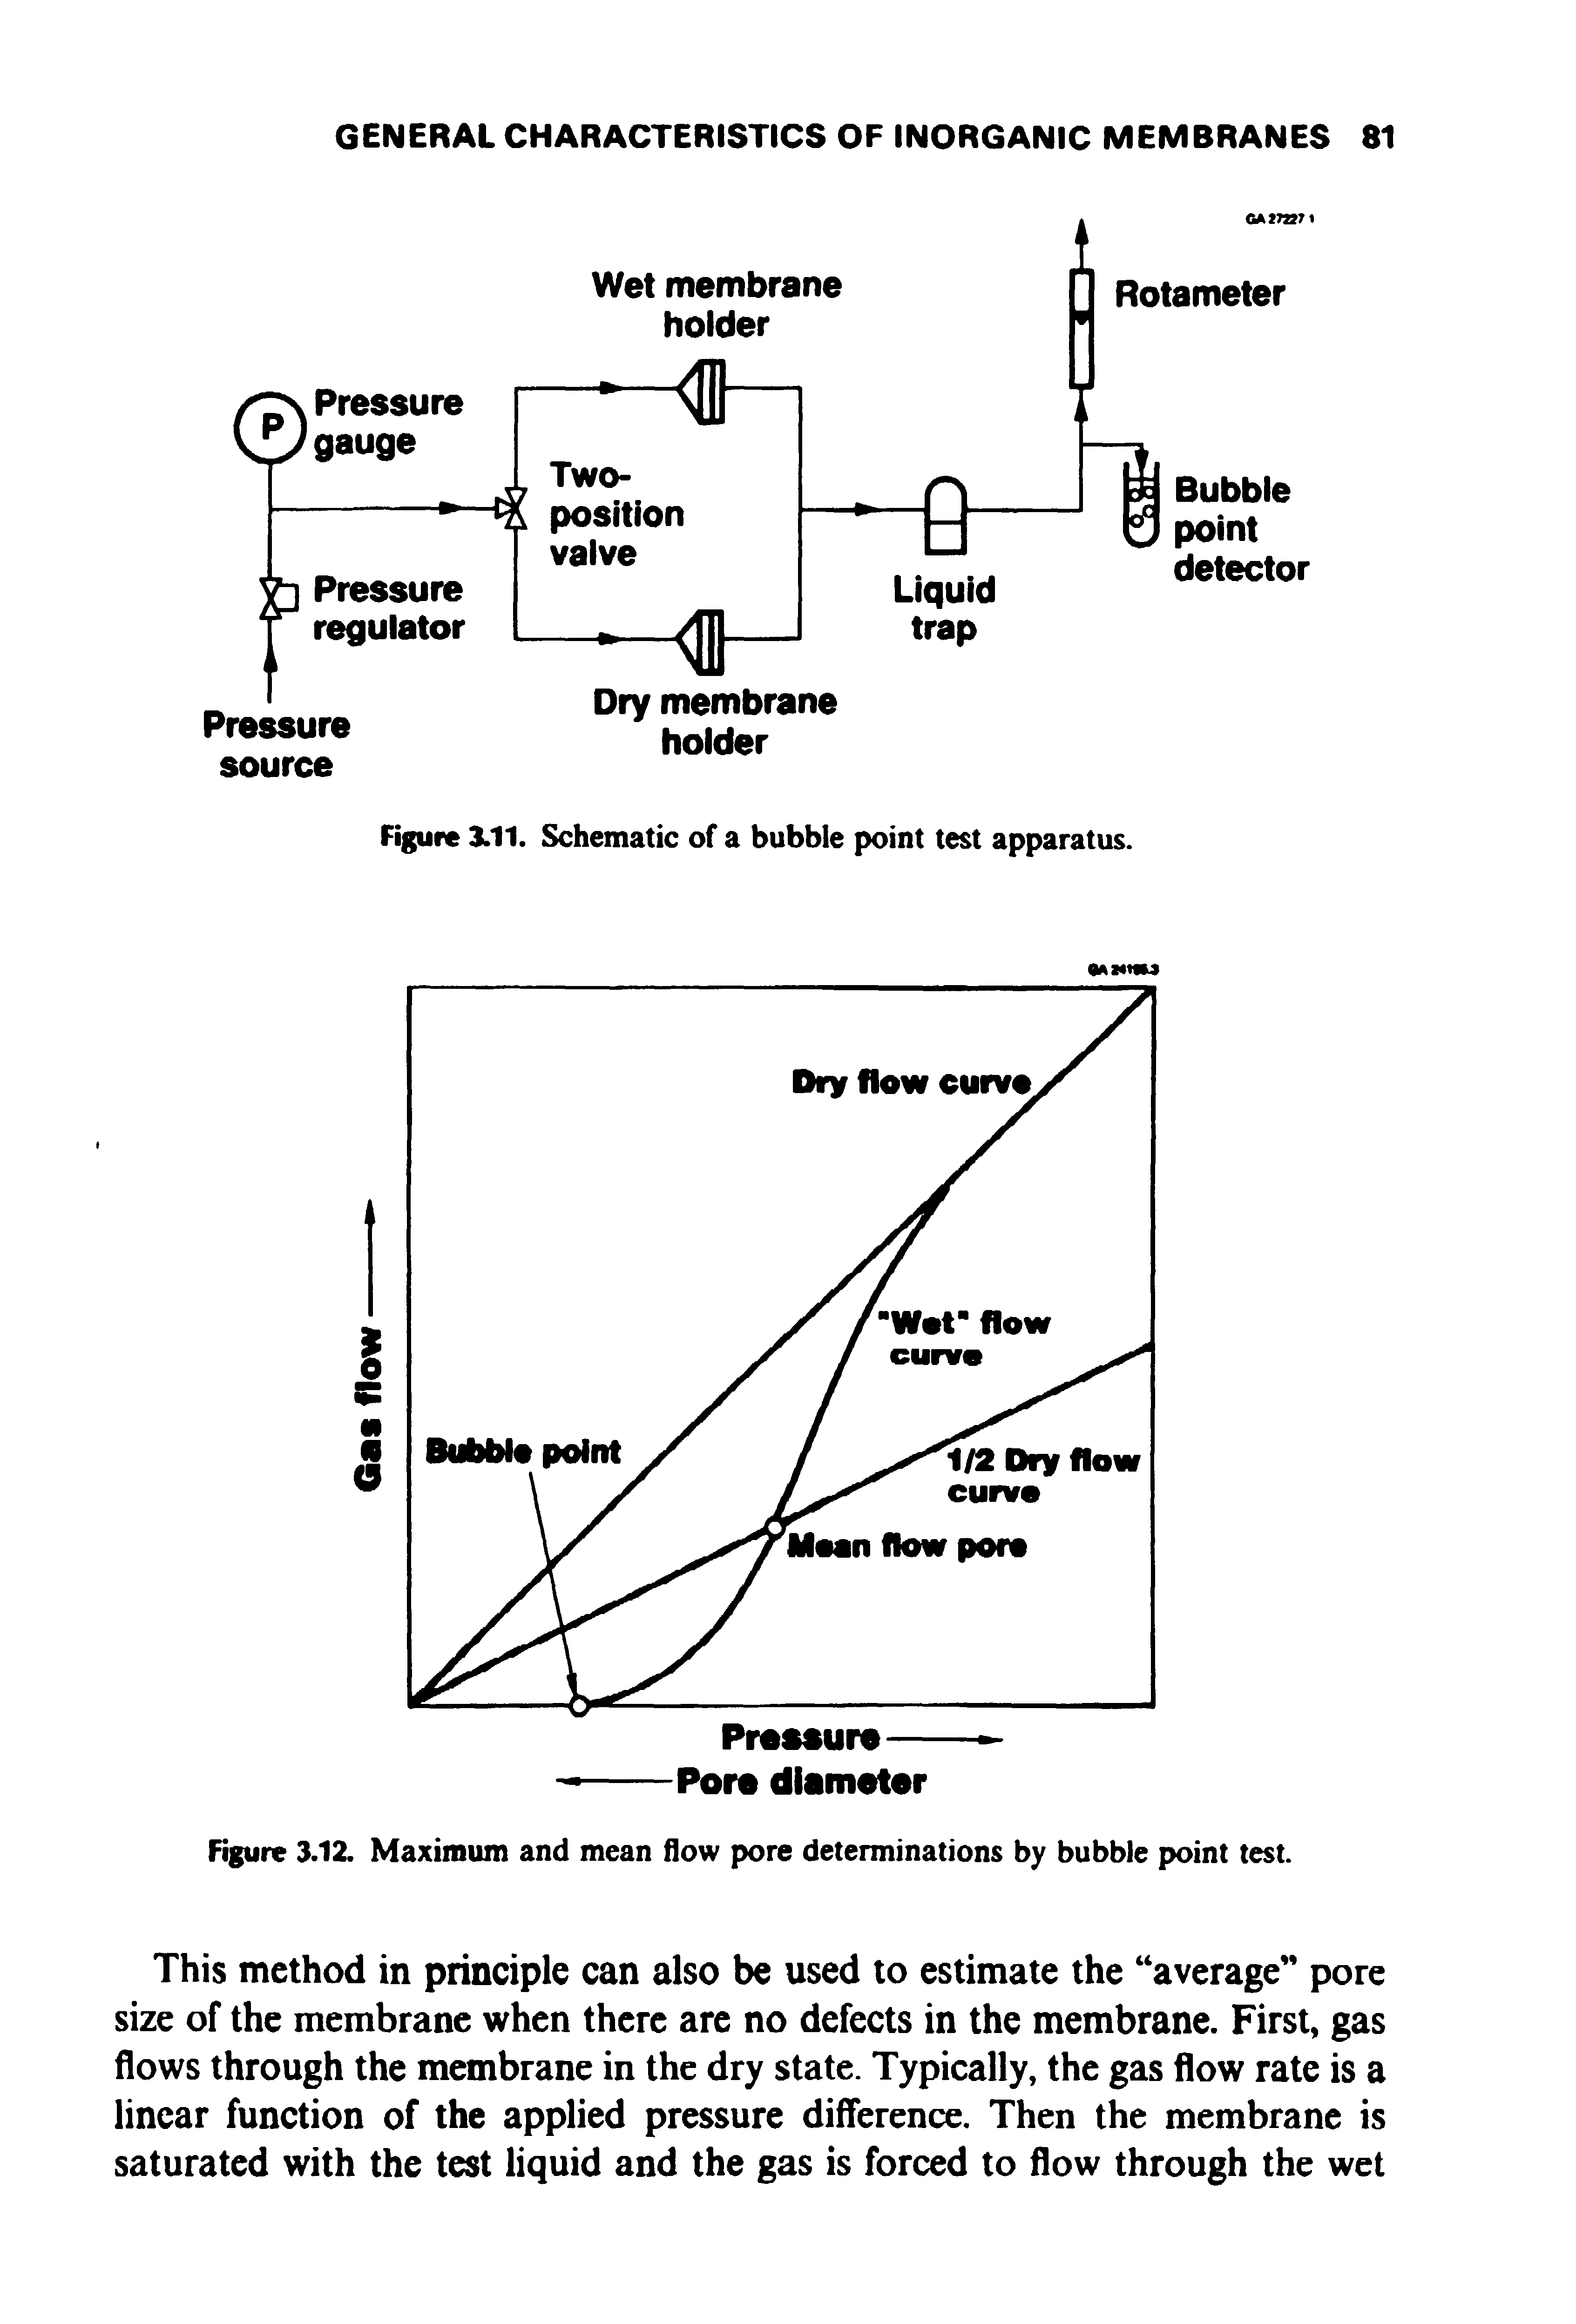 Figure XII. Schematic of a bubble point test apparatus.